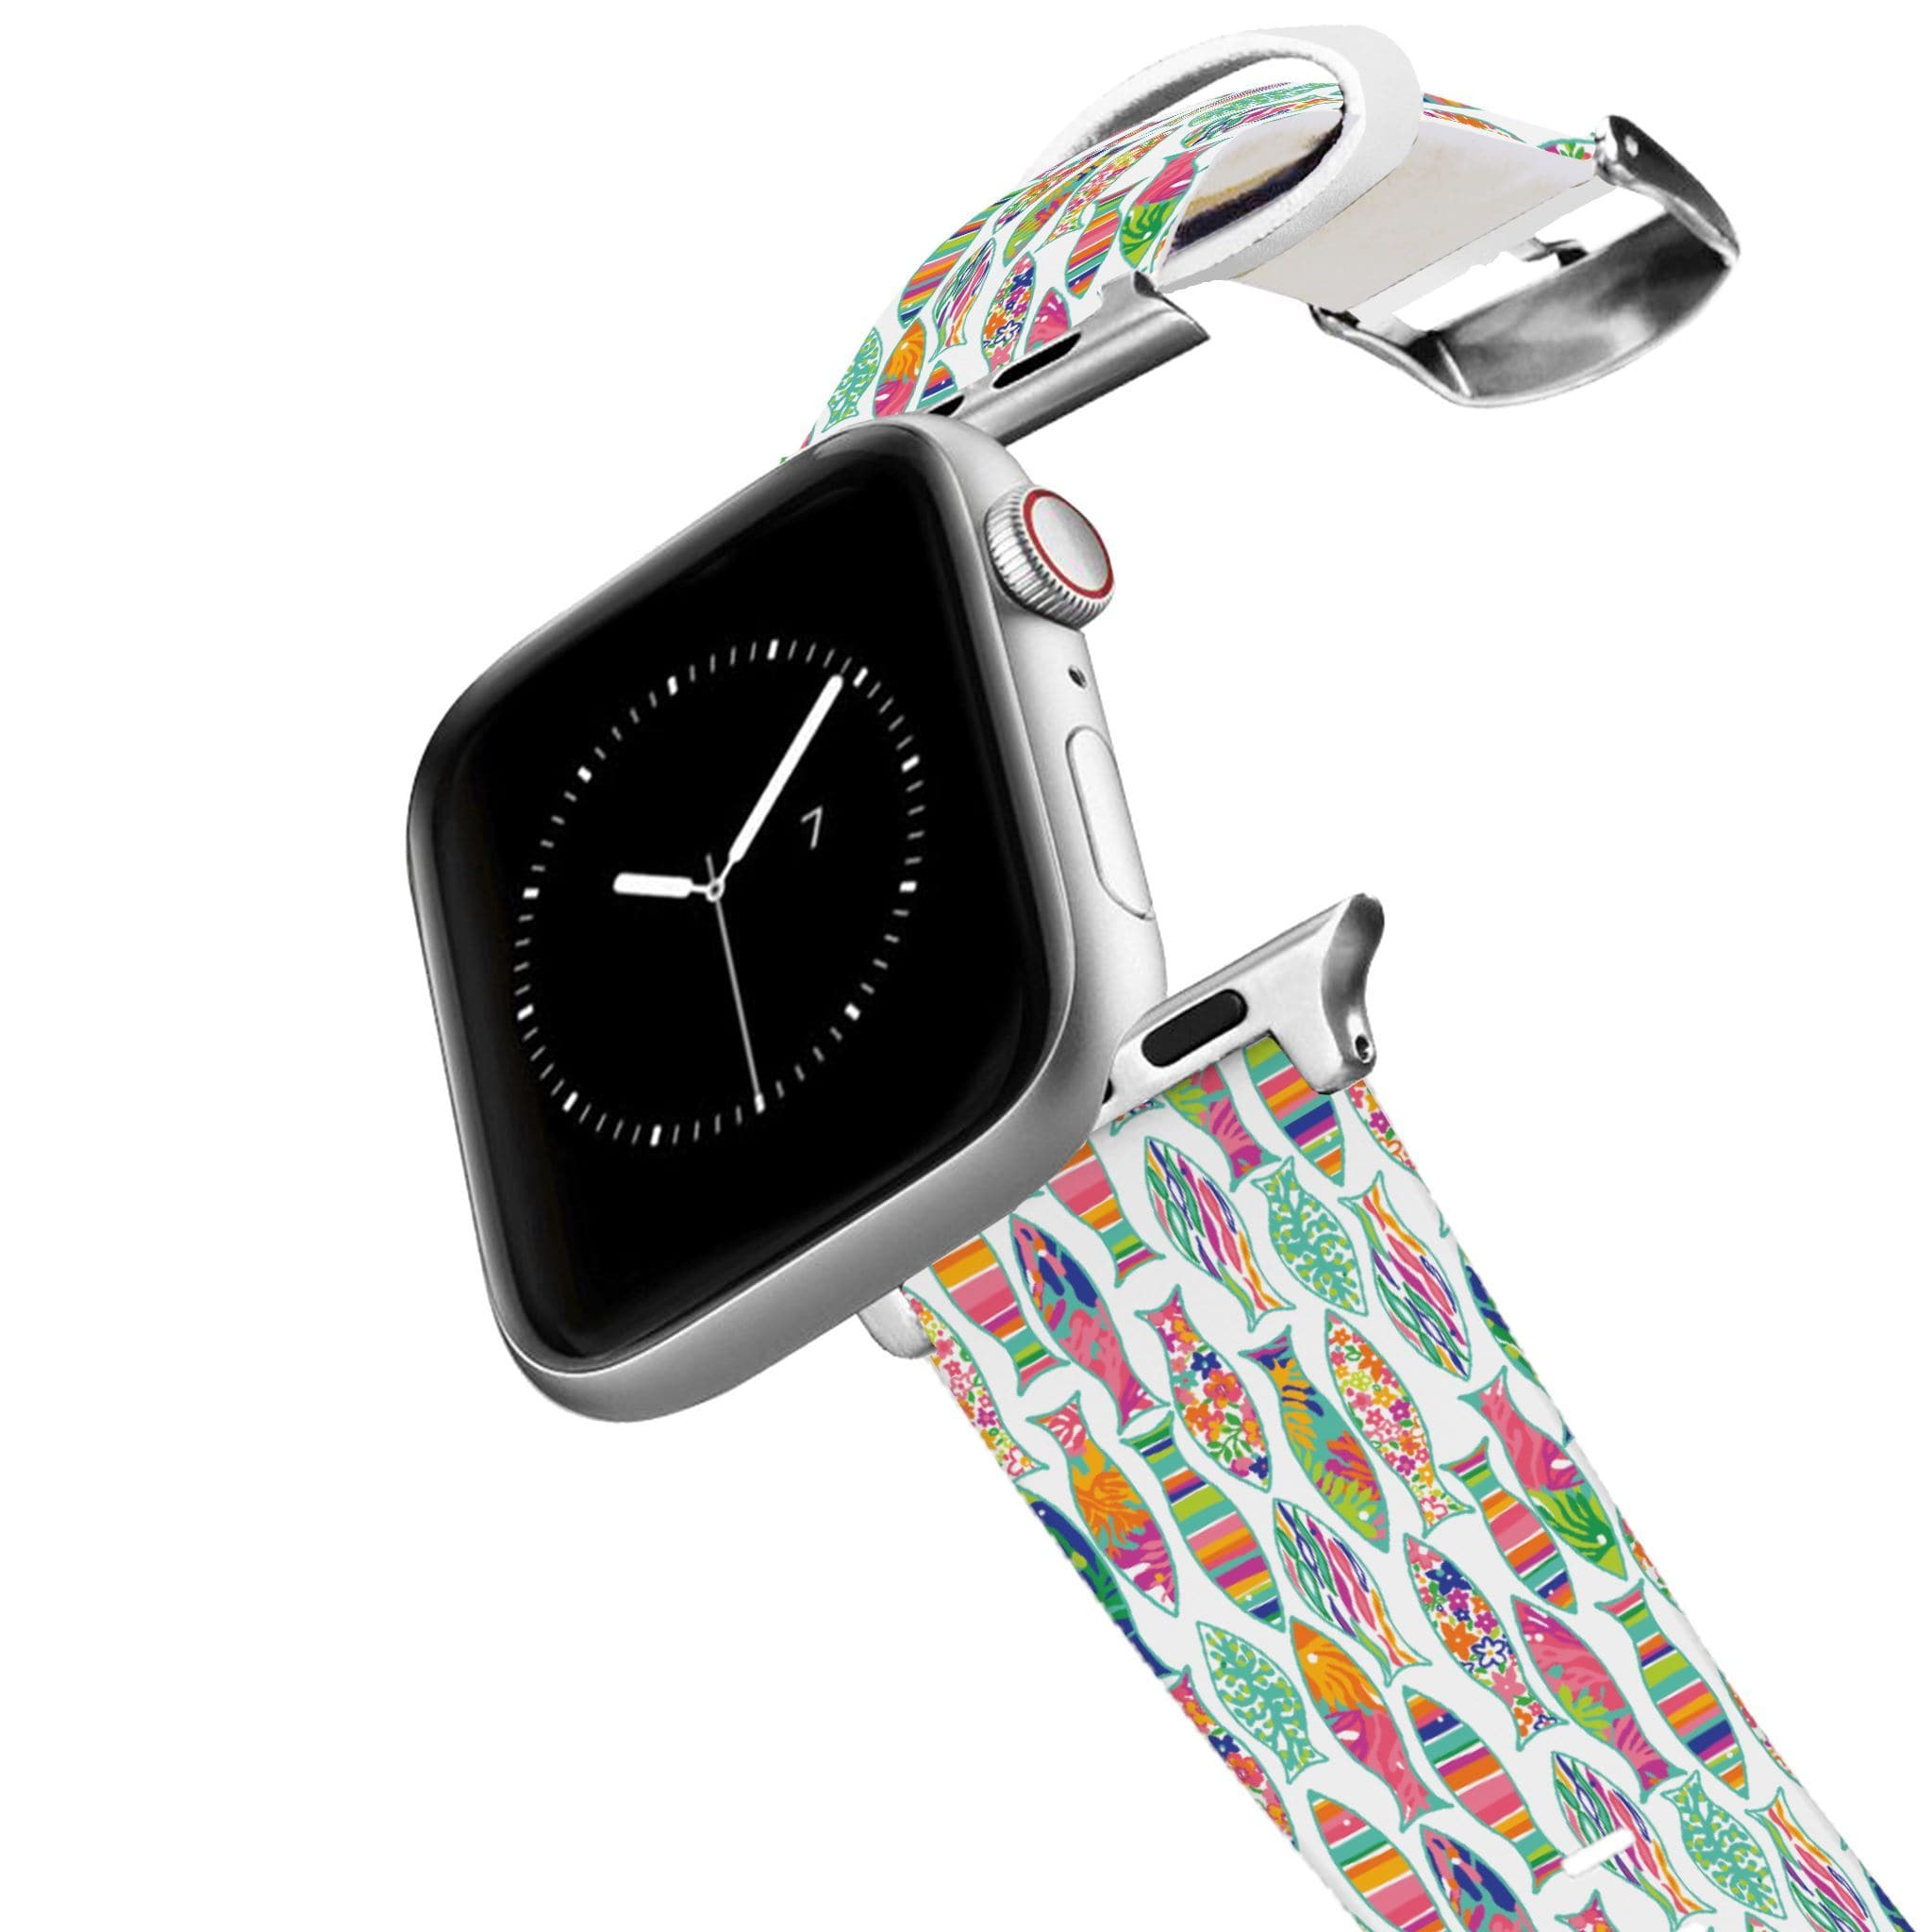 Fish Scale Stainless Steel Band for Apple Watch - Cxsbands